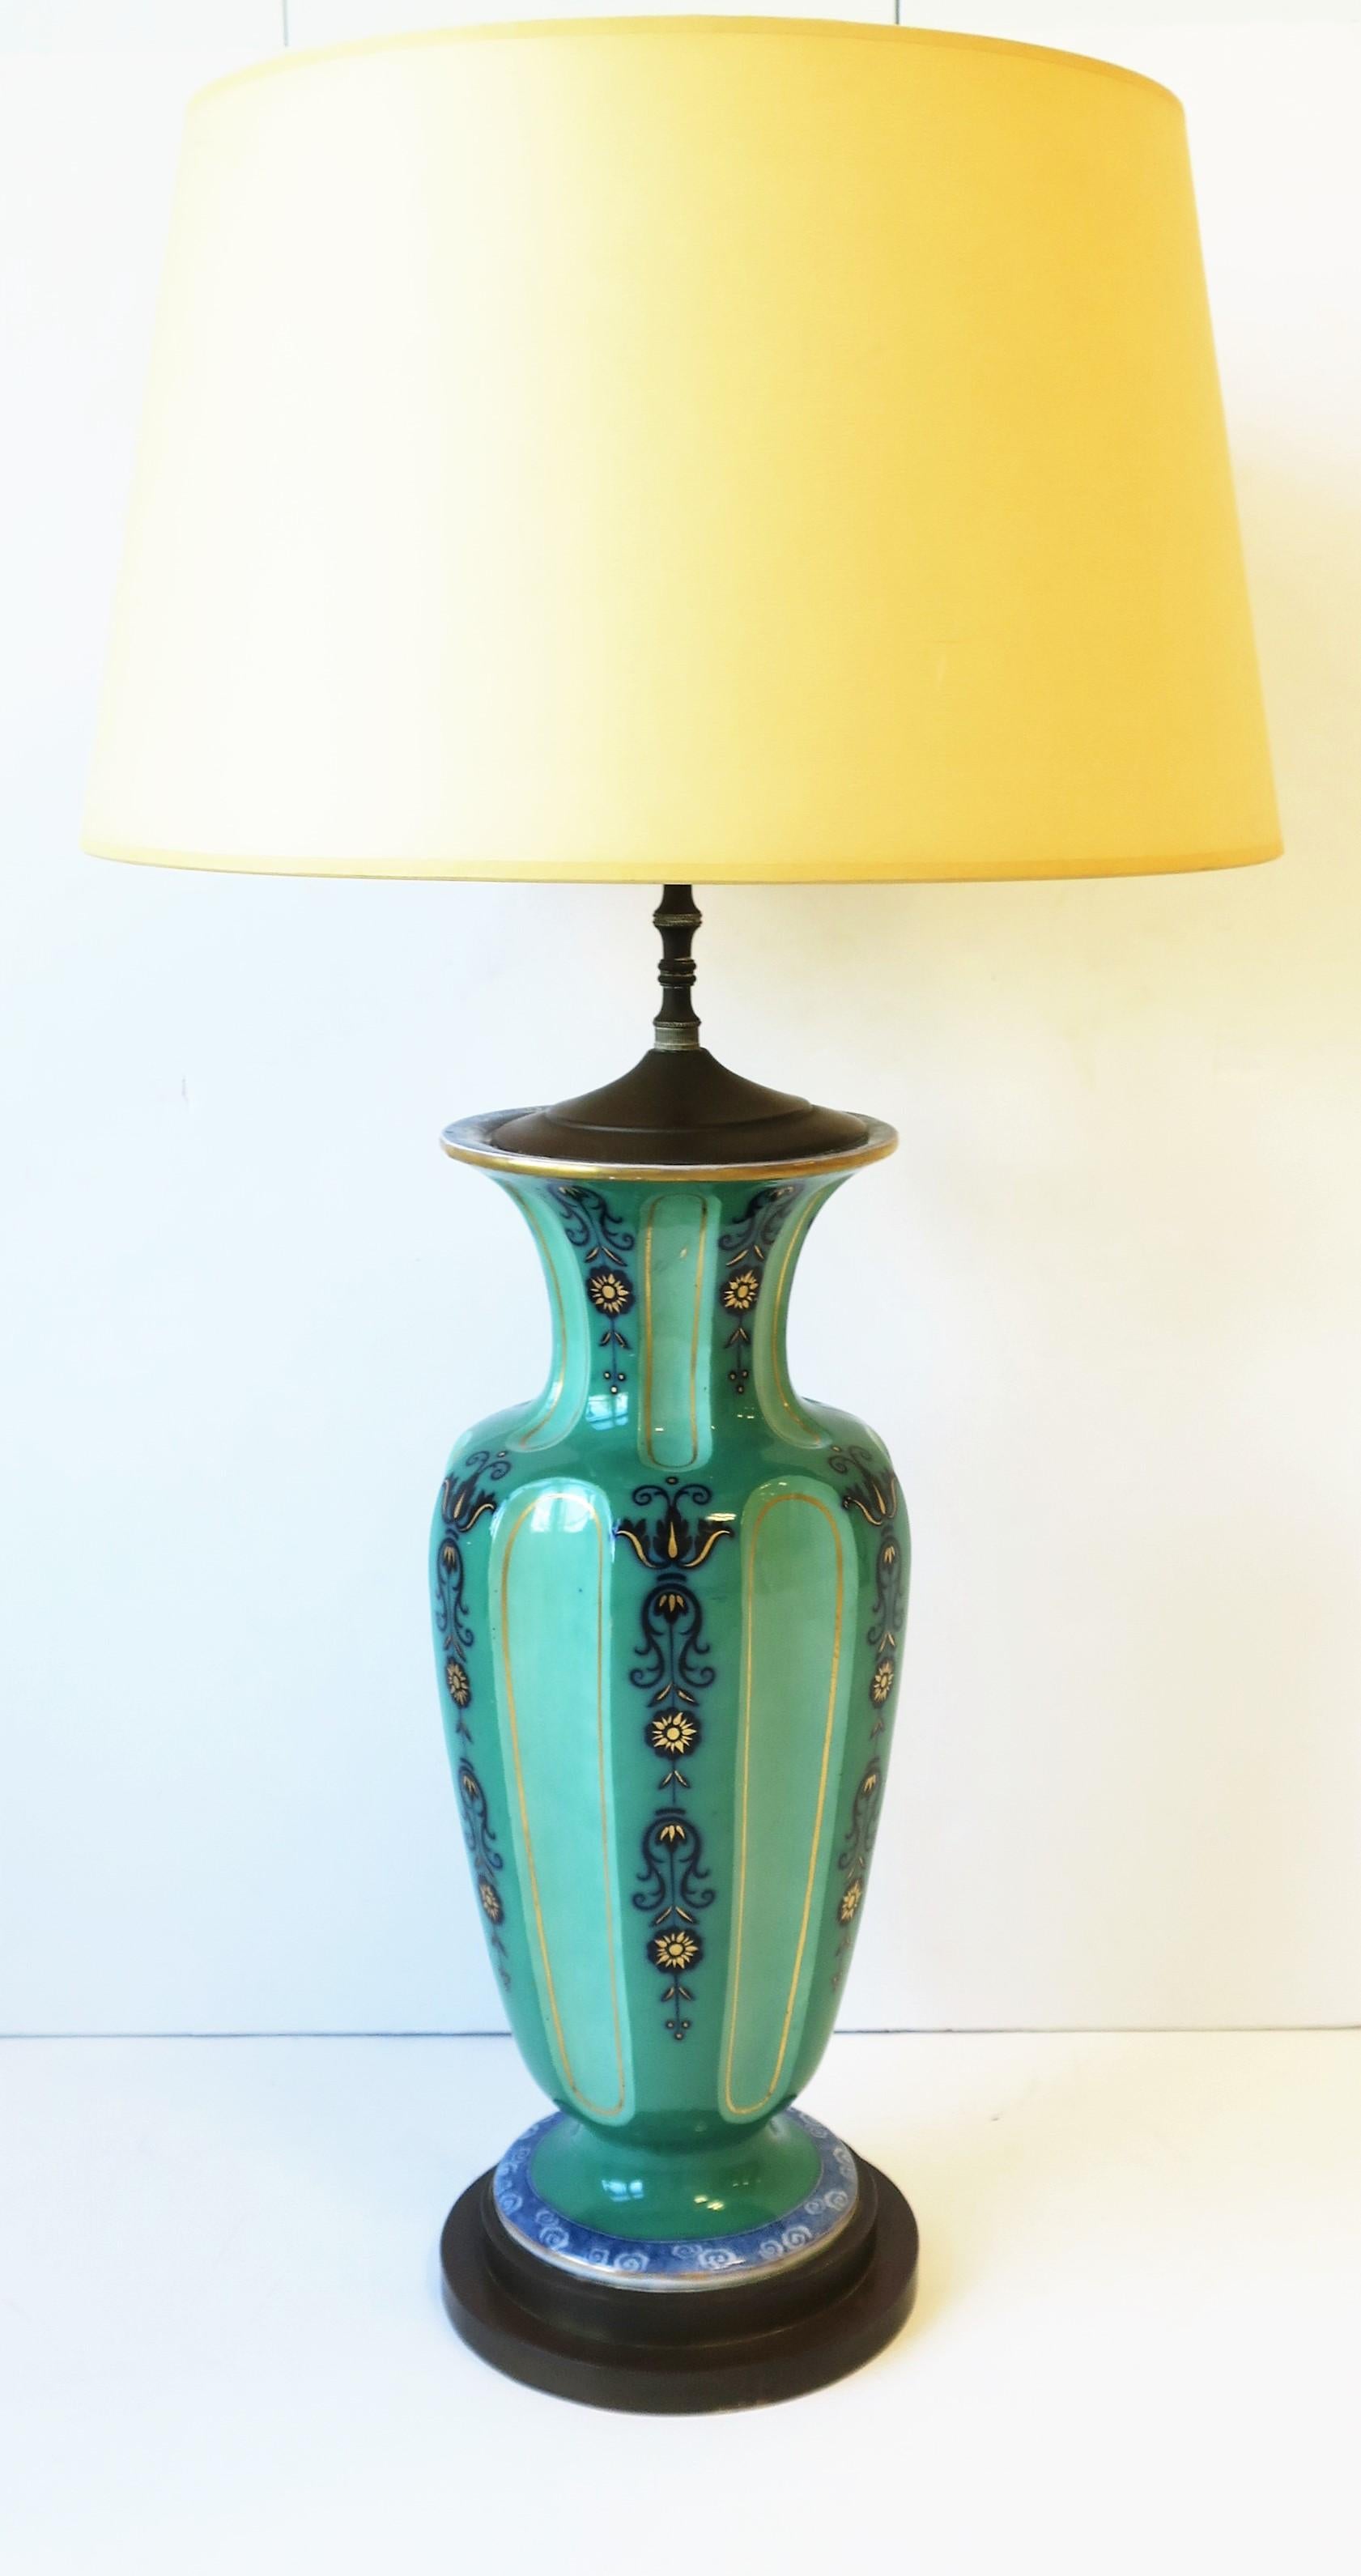 Dutch Blue White Green Porcelain Table Lamps Ginger Jar Style, circa 1930s For Sale 2